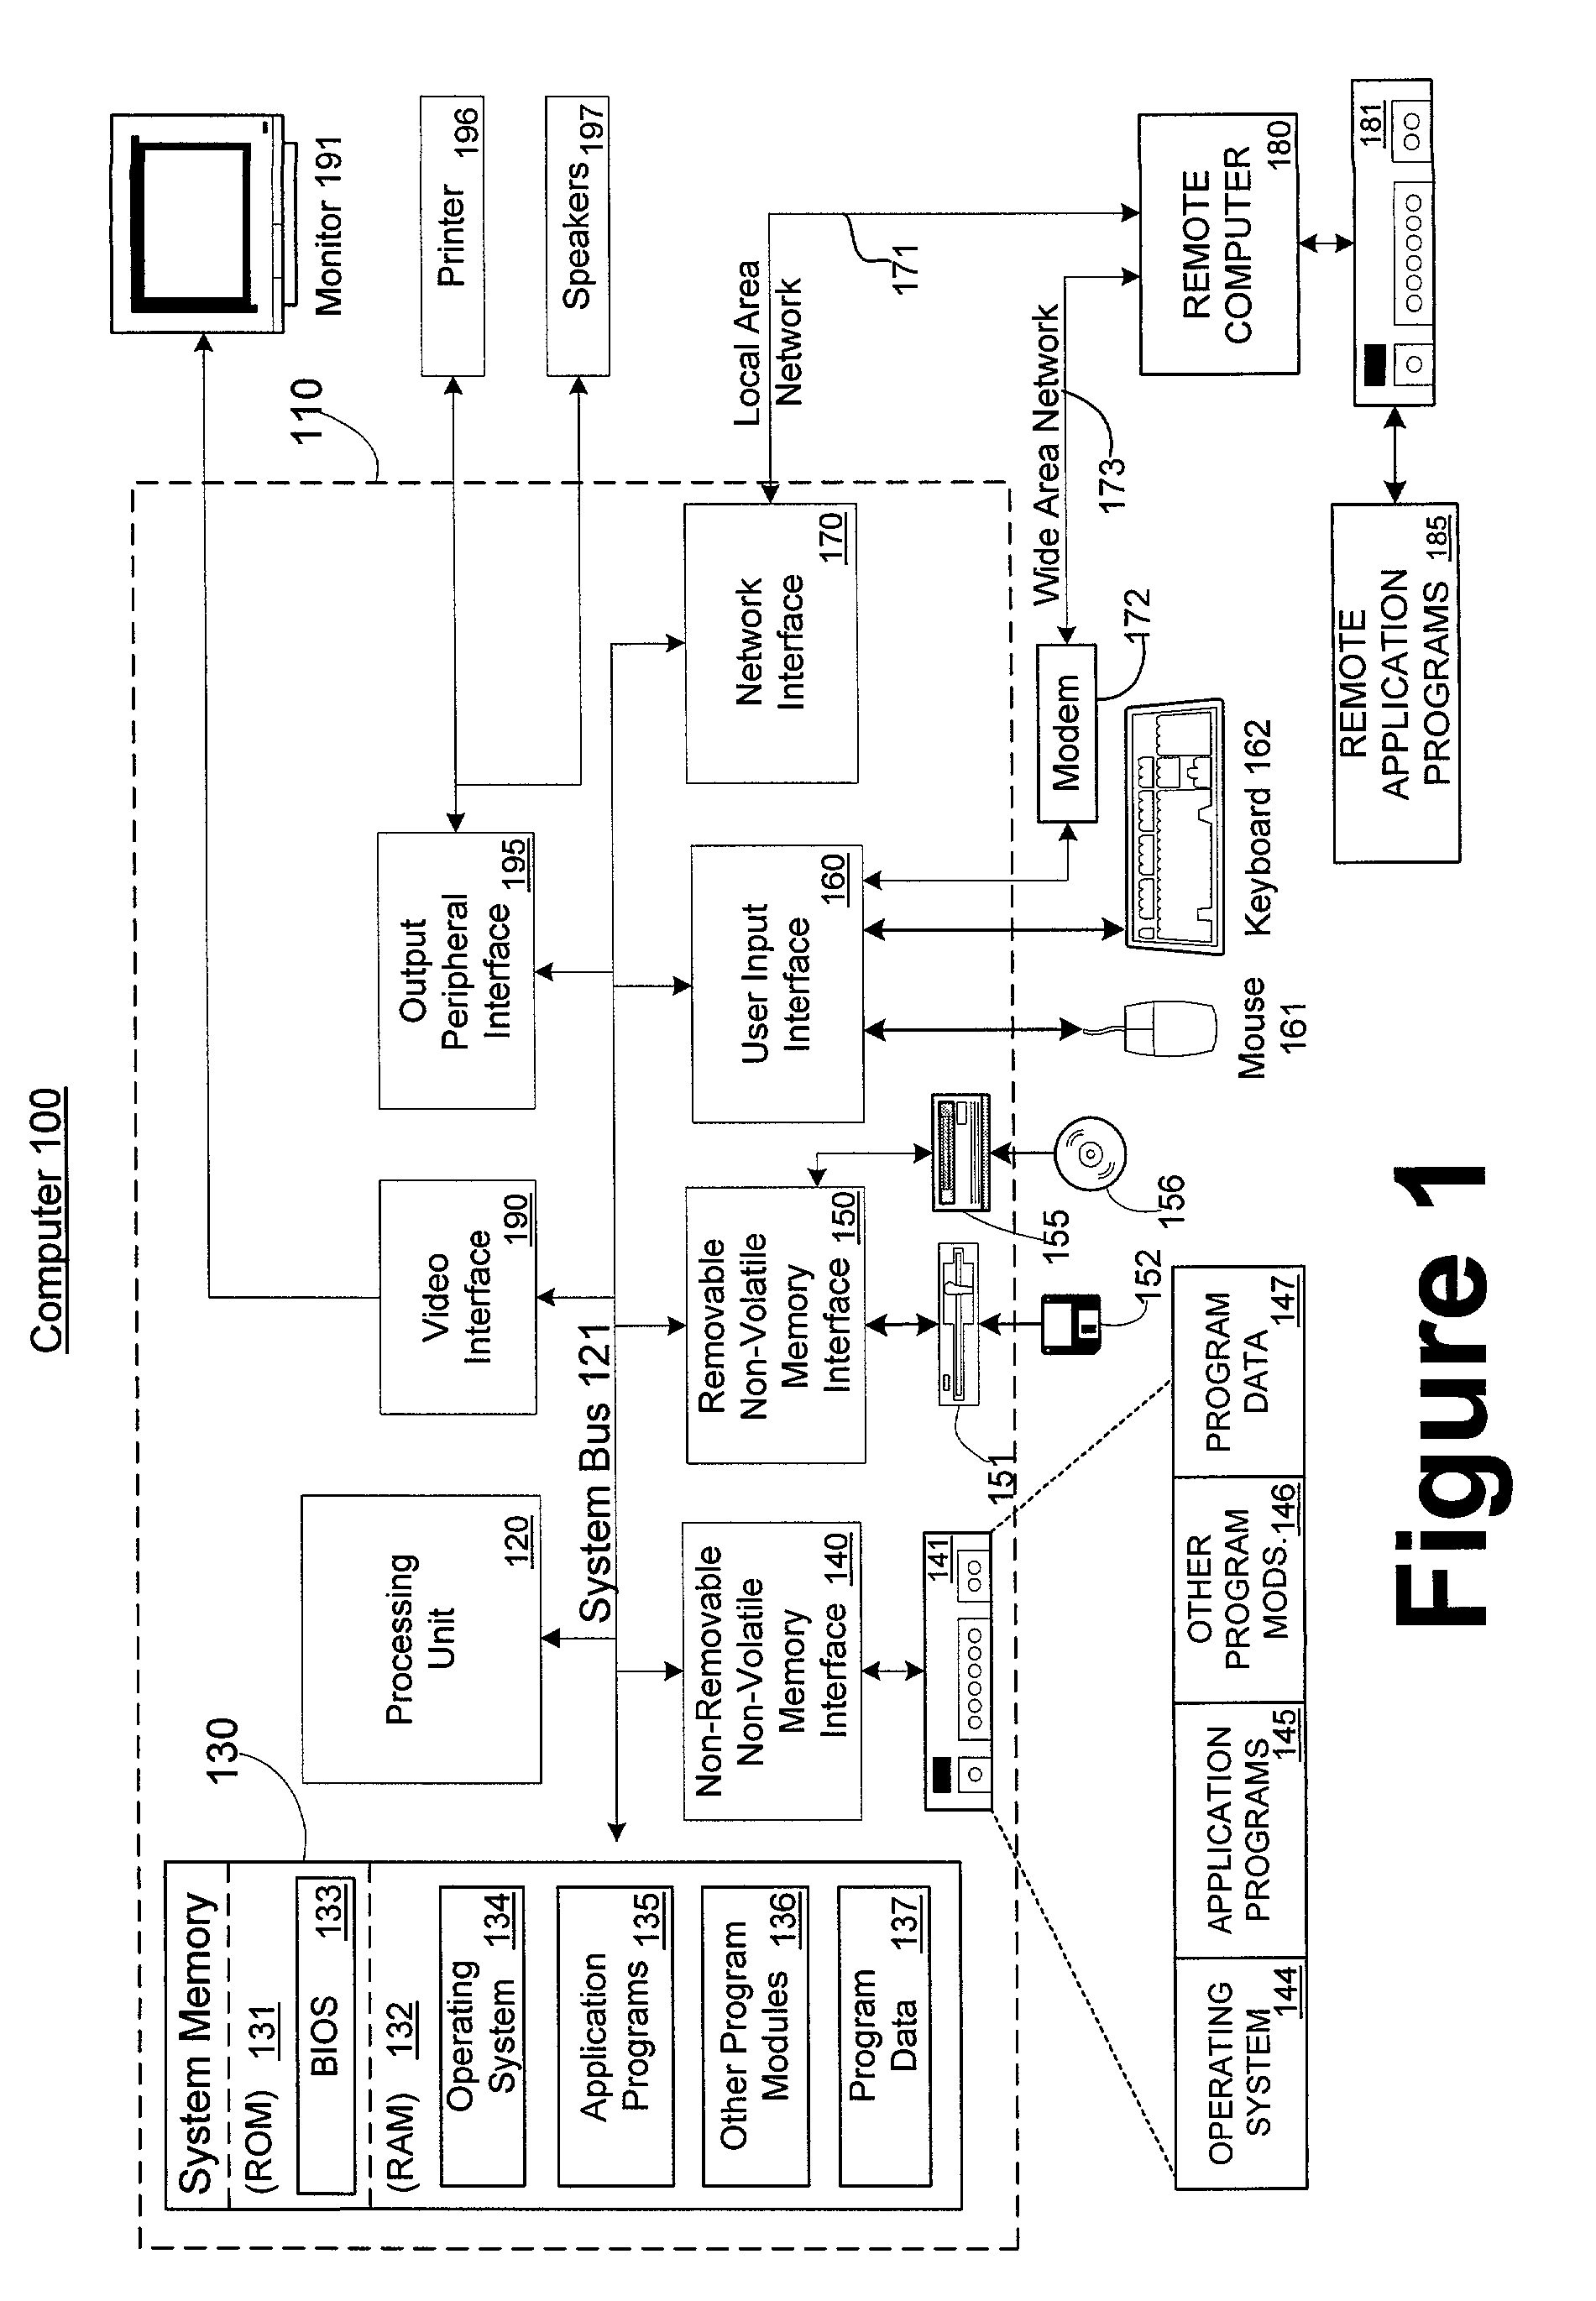 Systems and methods for conducting internet content usage experiments